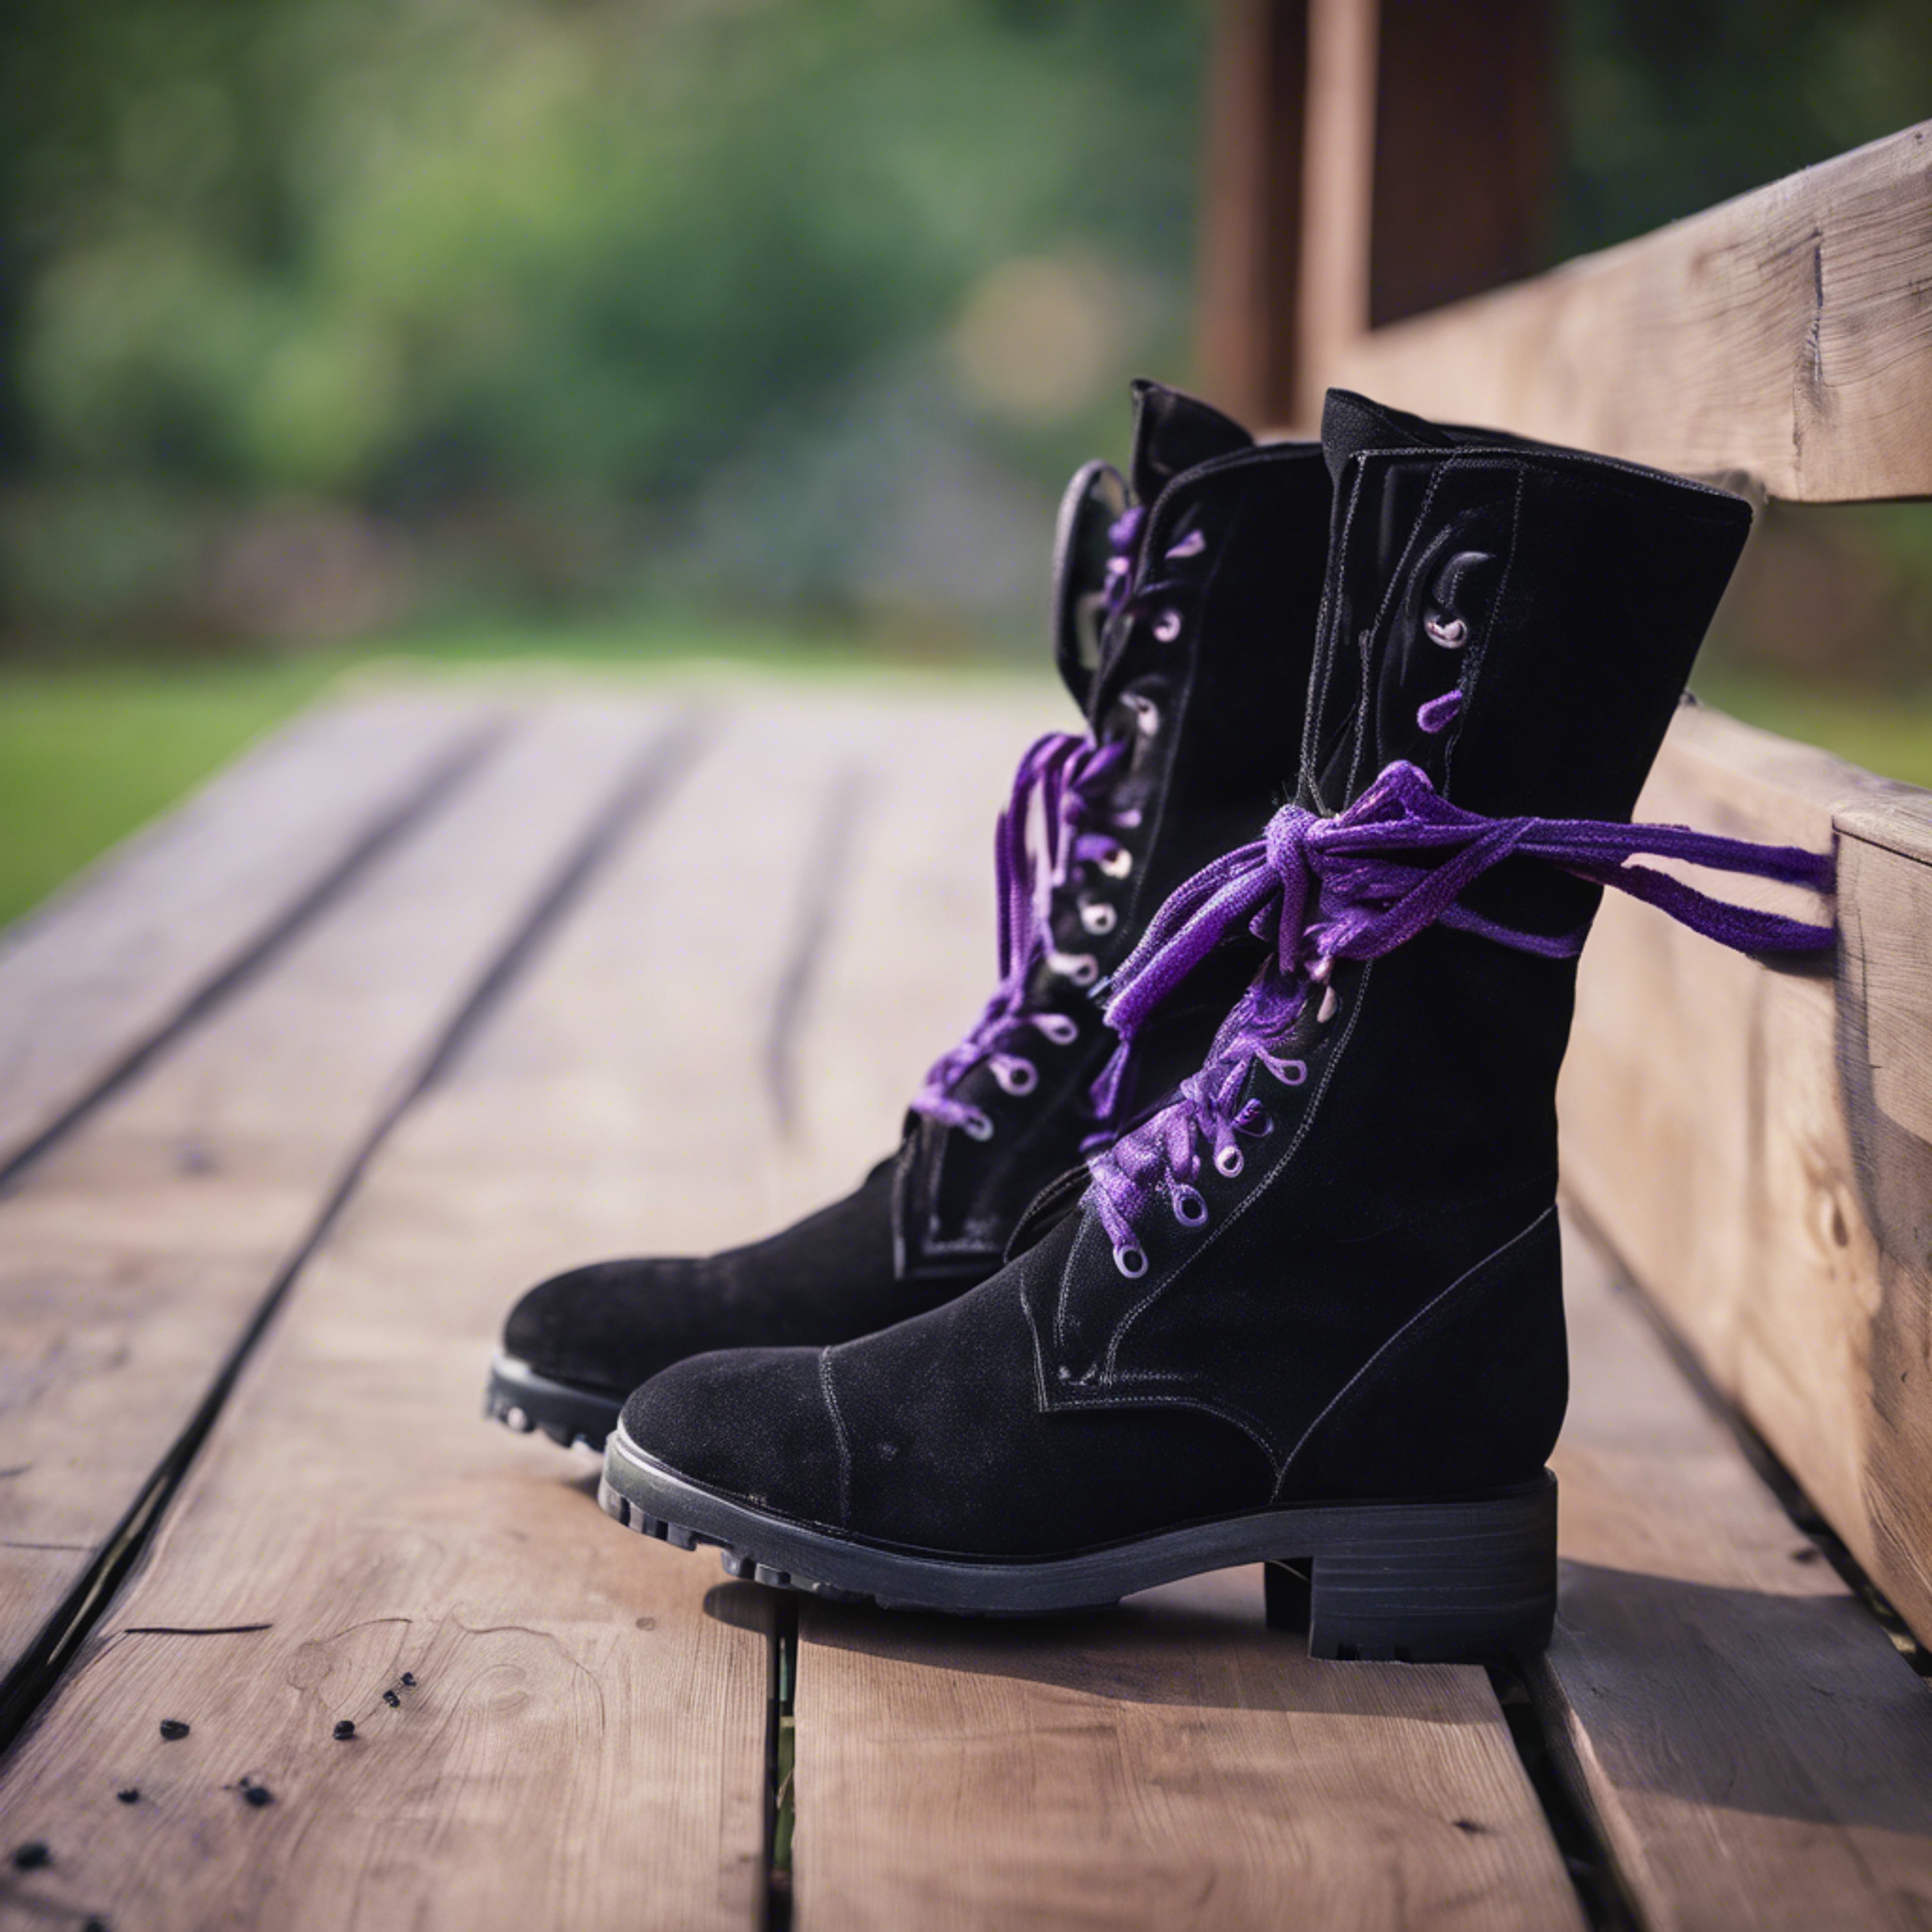 A pair of black suede boots with purple laces left casually on a wooden porch.